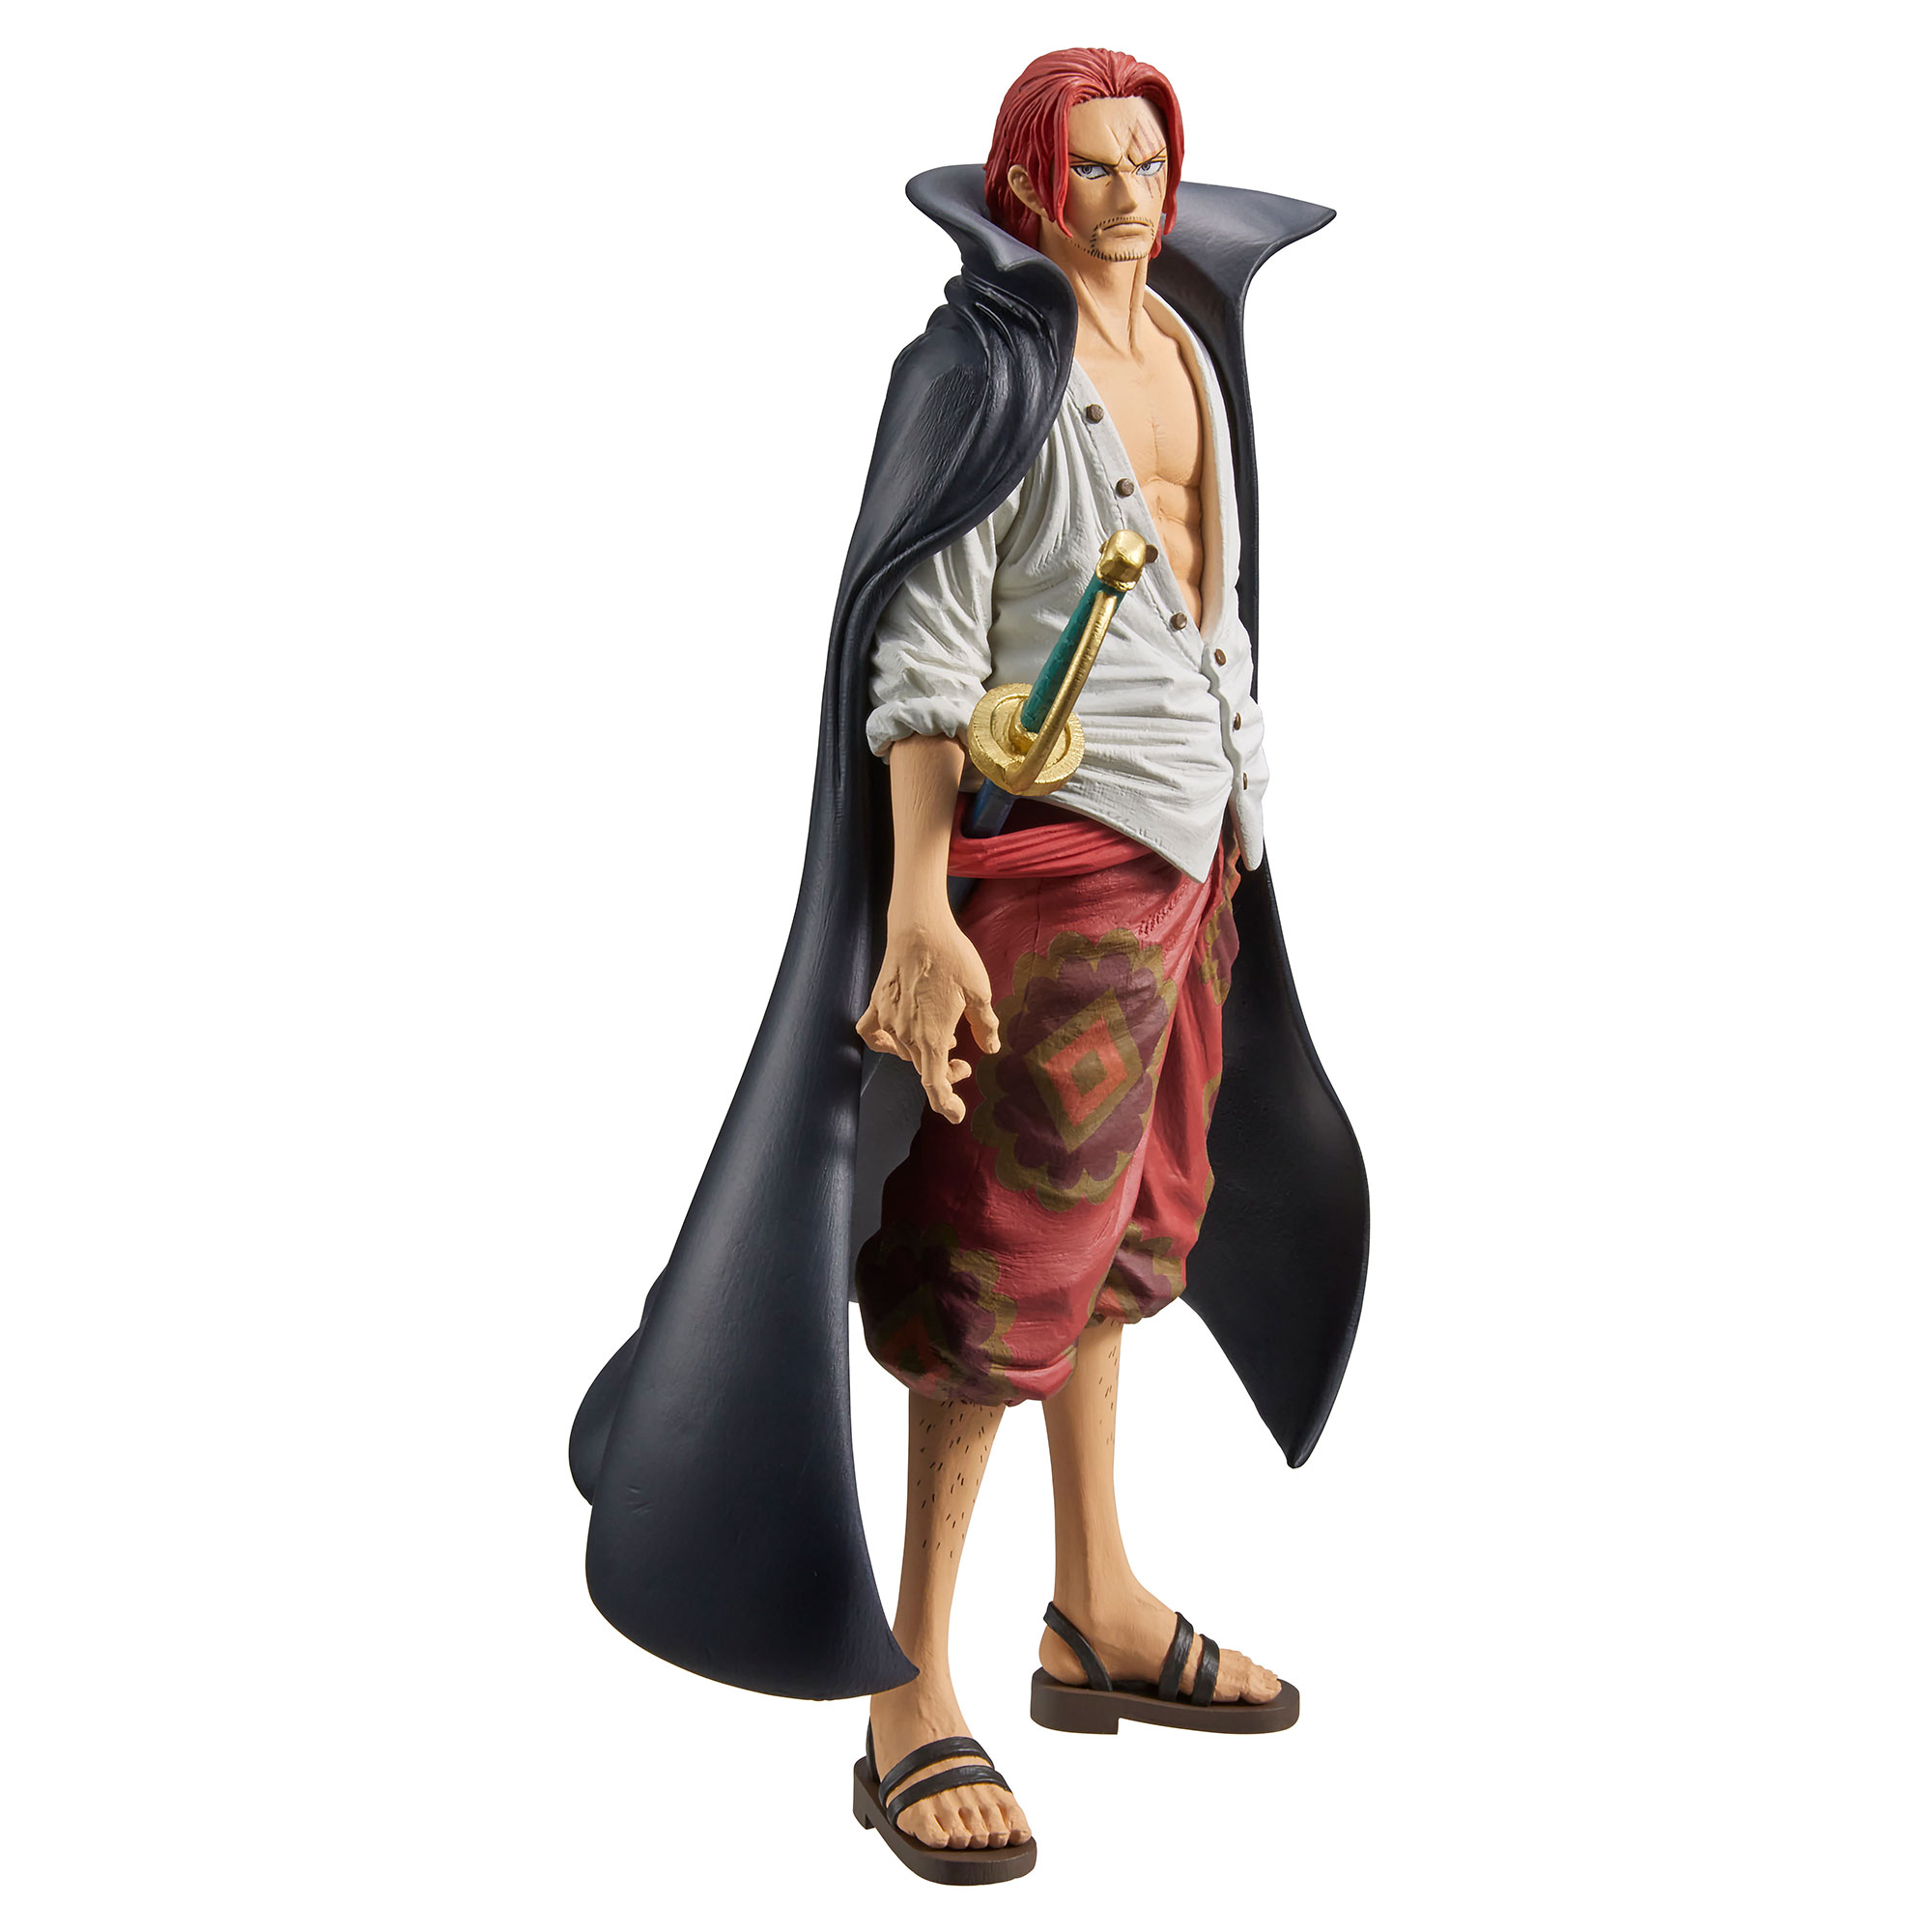 Who is Shanks in One Piece?